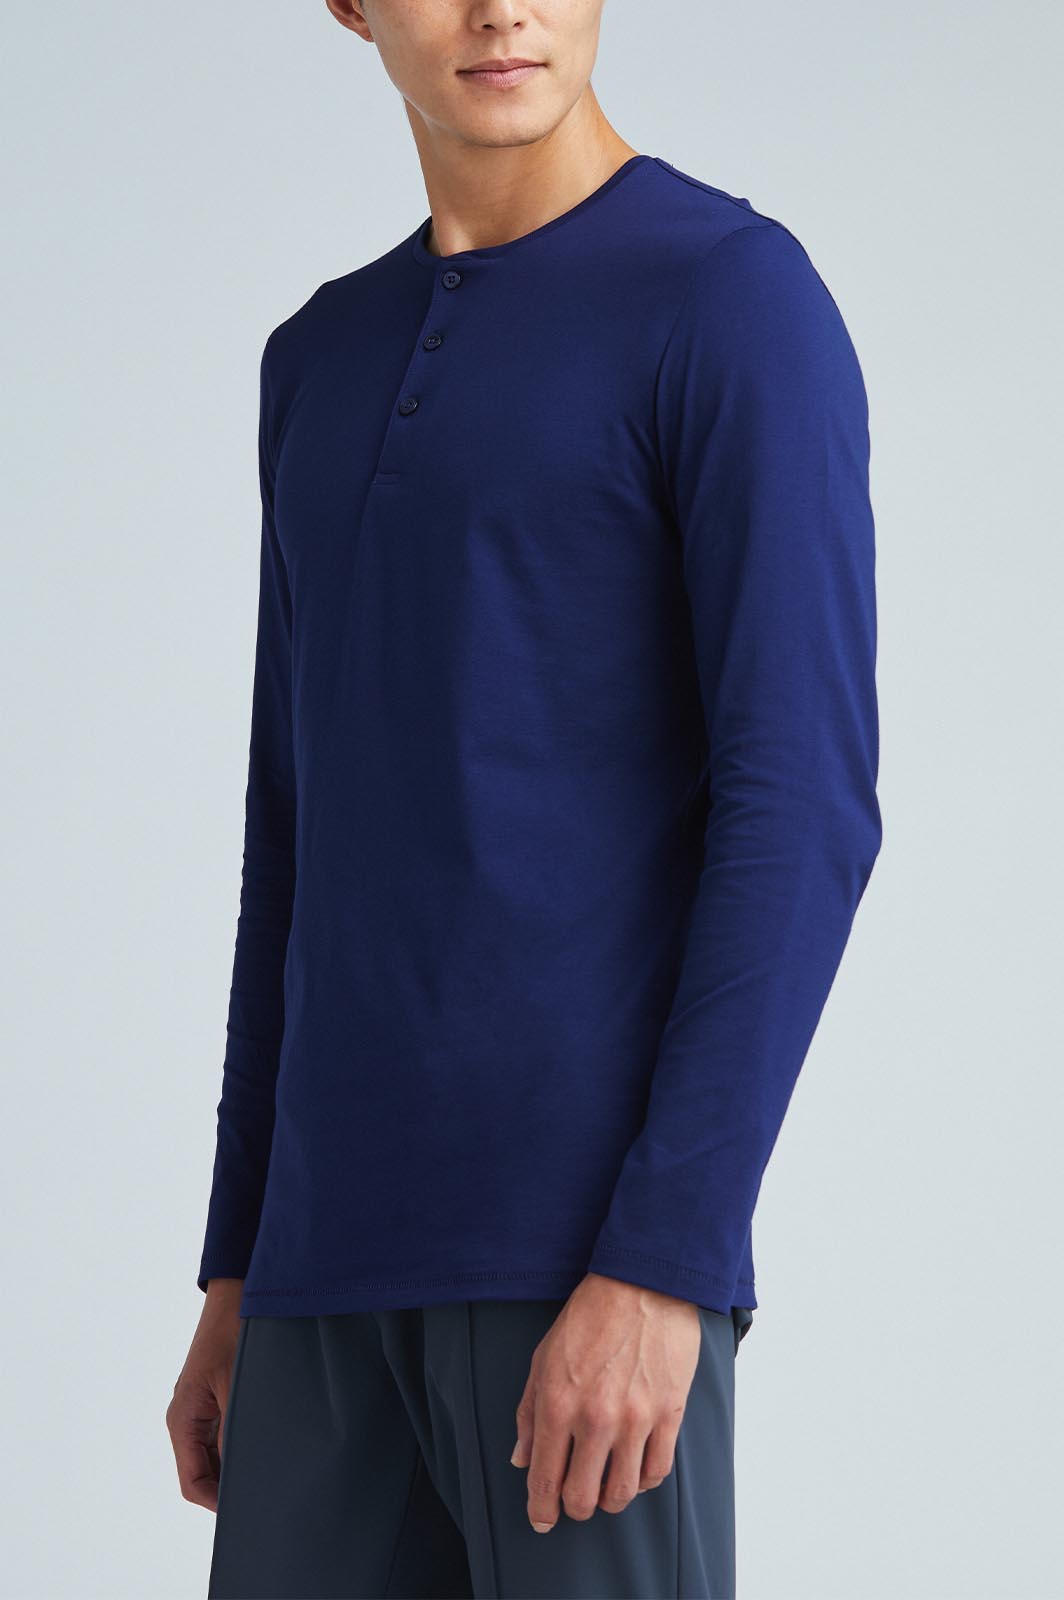 Stanley Men's Long Sleeve Pocketed Henley Shirt, Blue Stone, 2X-Large